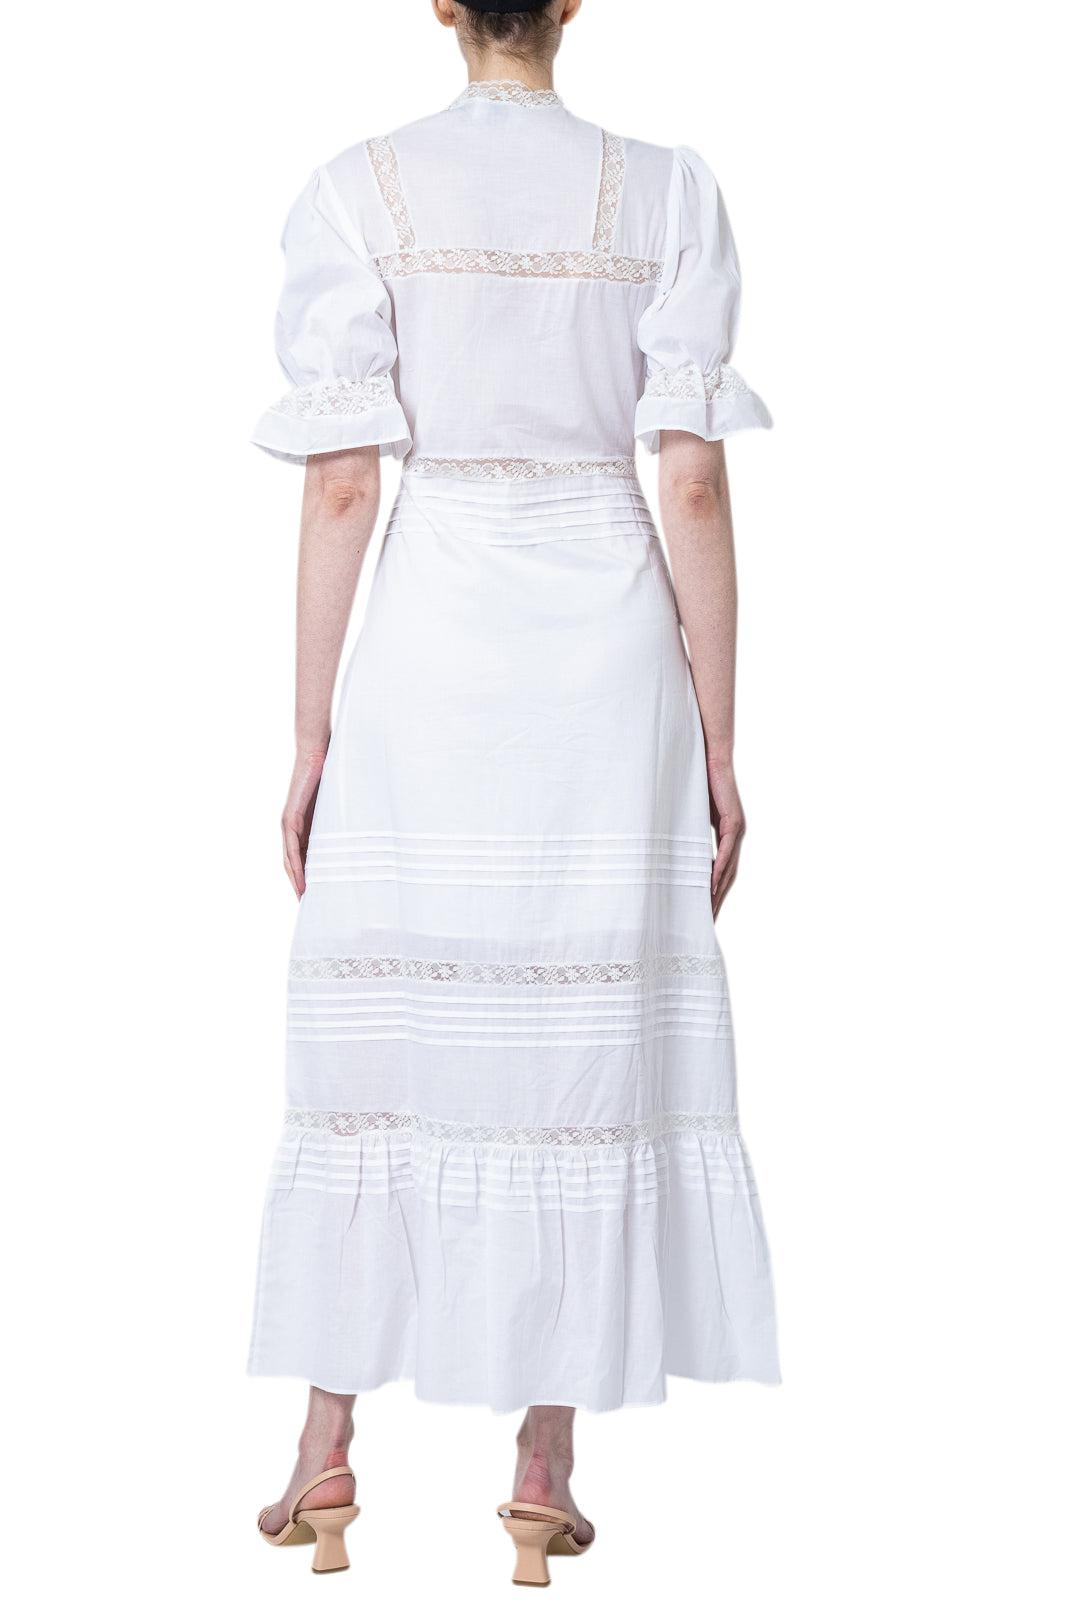 Sir The Label-Embroidered Dress-dgallerystore